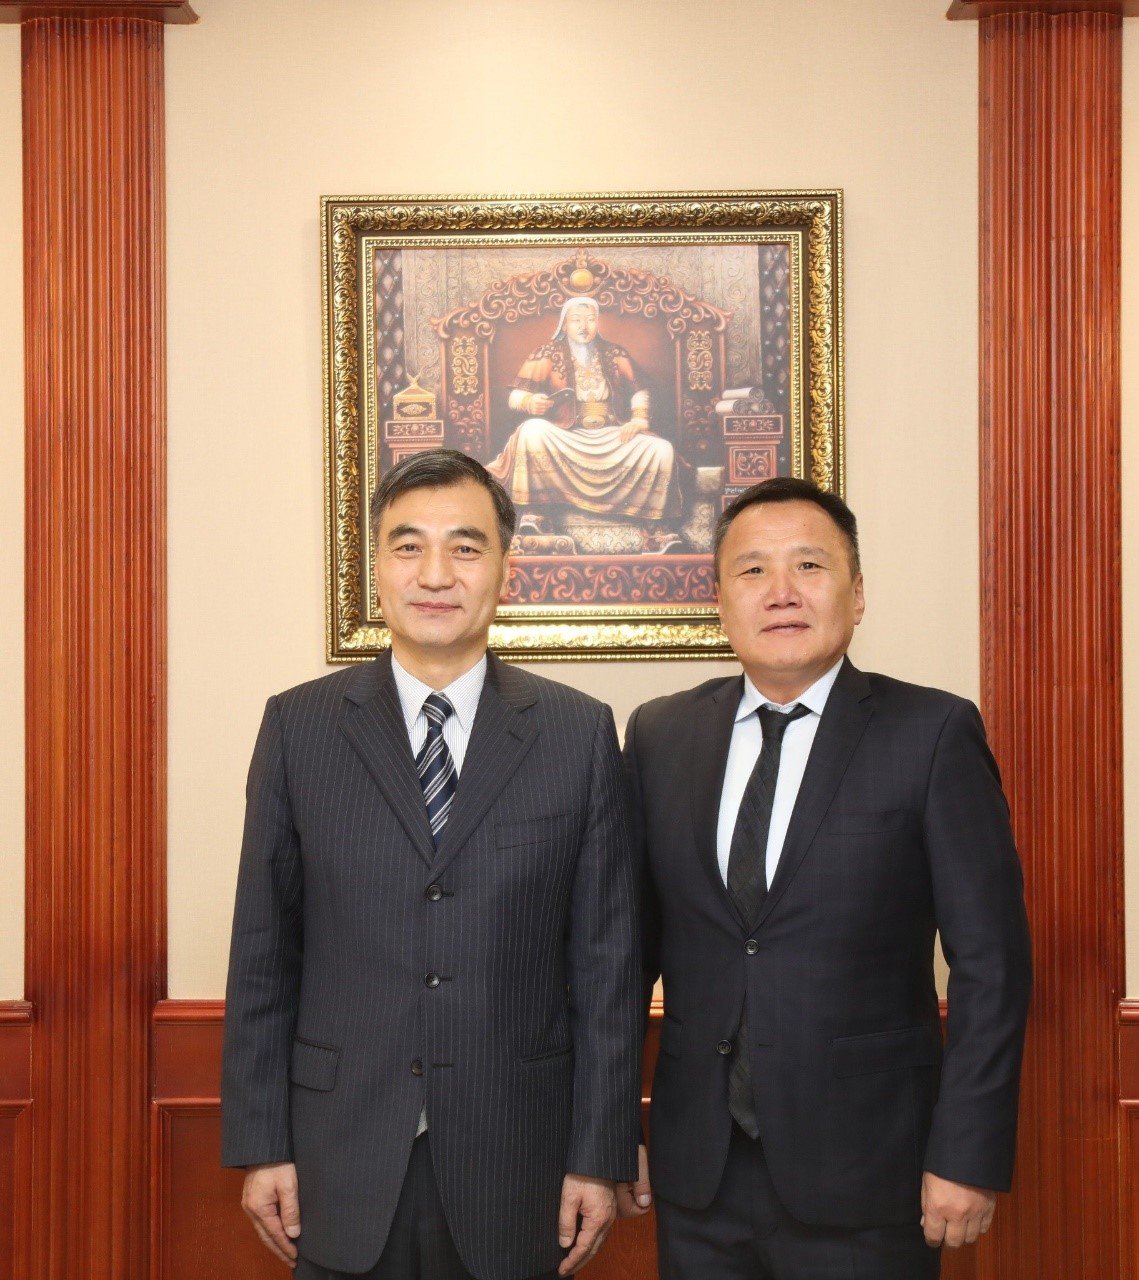 The Ambassador of the People’s Republic of China visited the IAAC